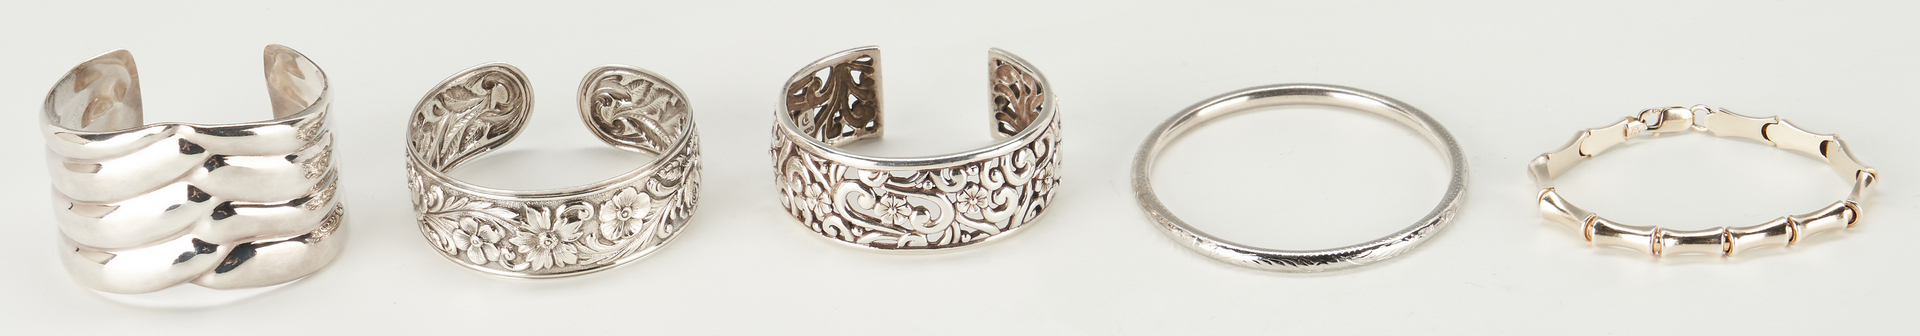 Lot 943: 11 Sterling and Coin Silver Jewelry Pieces